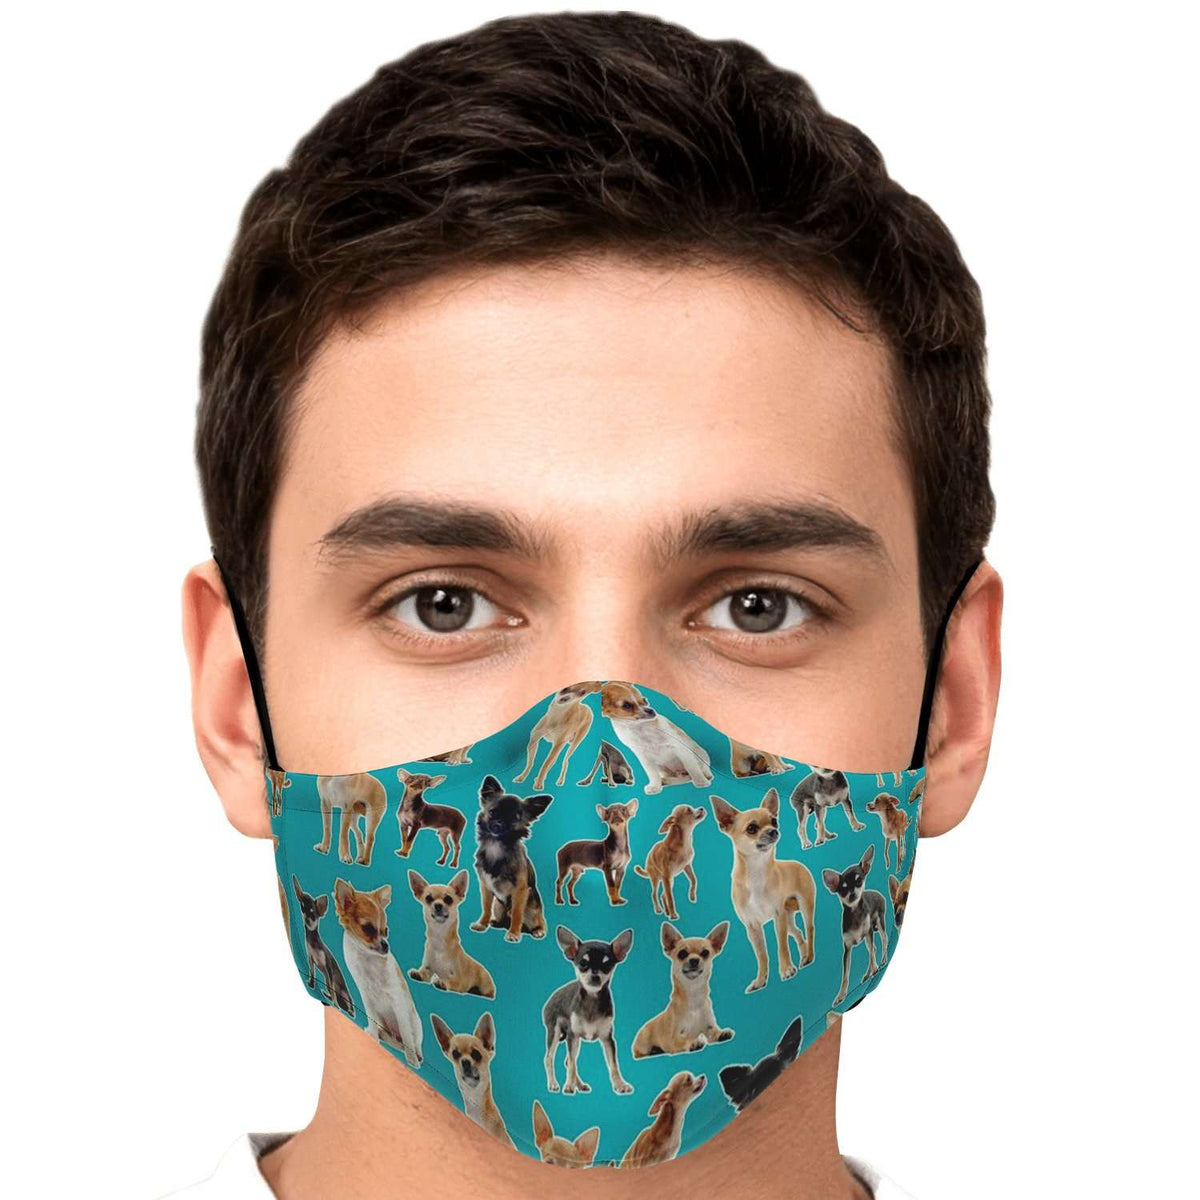 Designs by MyUtopia Shout Out:Chihuahua - Fitted Fabric Face Mask w. Adjustable Ear Loops,Adult / Single / No filters,Fabric Face Mask